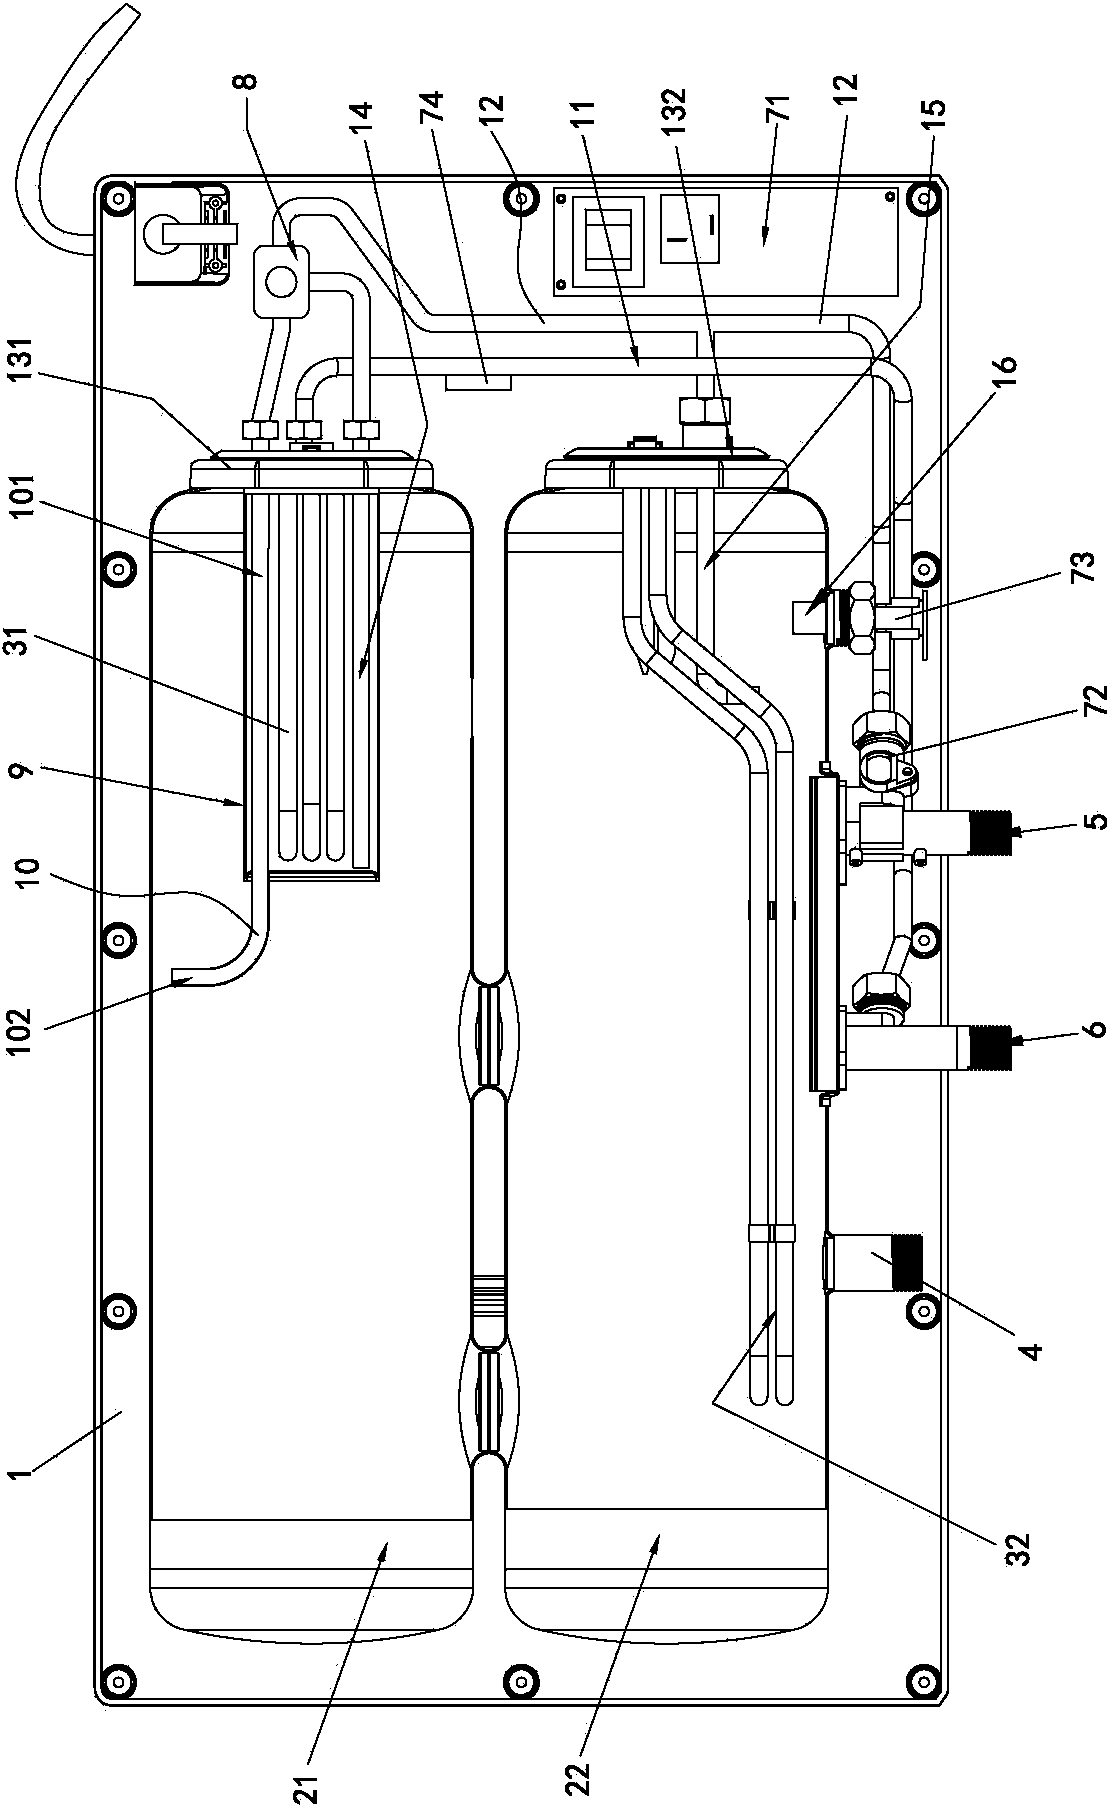 Constant-temperature electric water heater with low energy consumption and doubled hot water volume